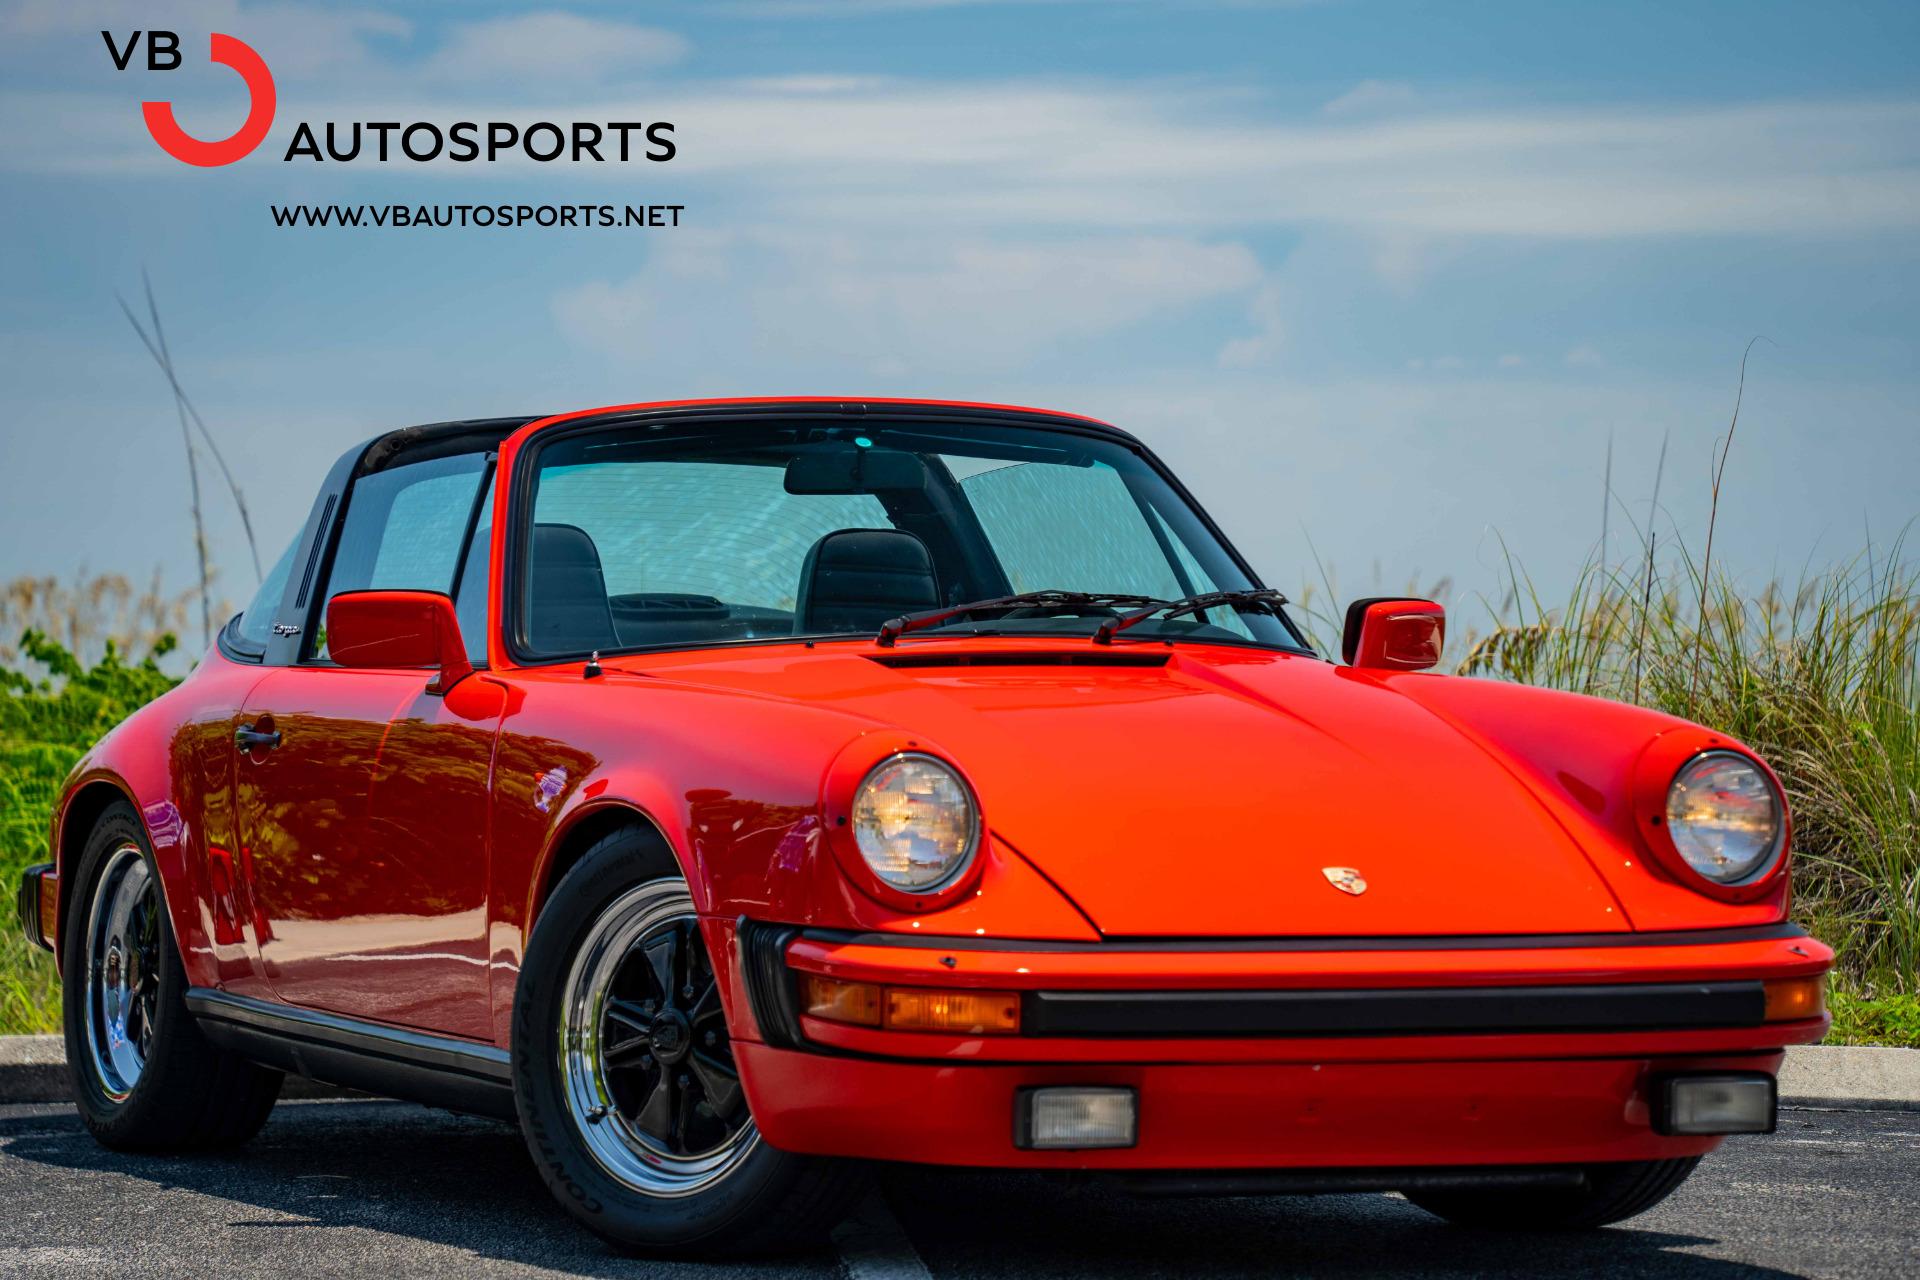 1983 PORSCHE 911 SC CABRIOLET for sale by auction in Dana Point, CA, USA